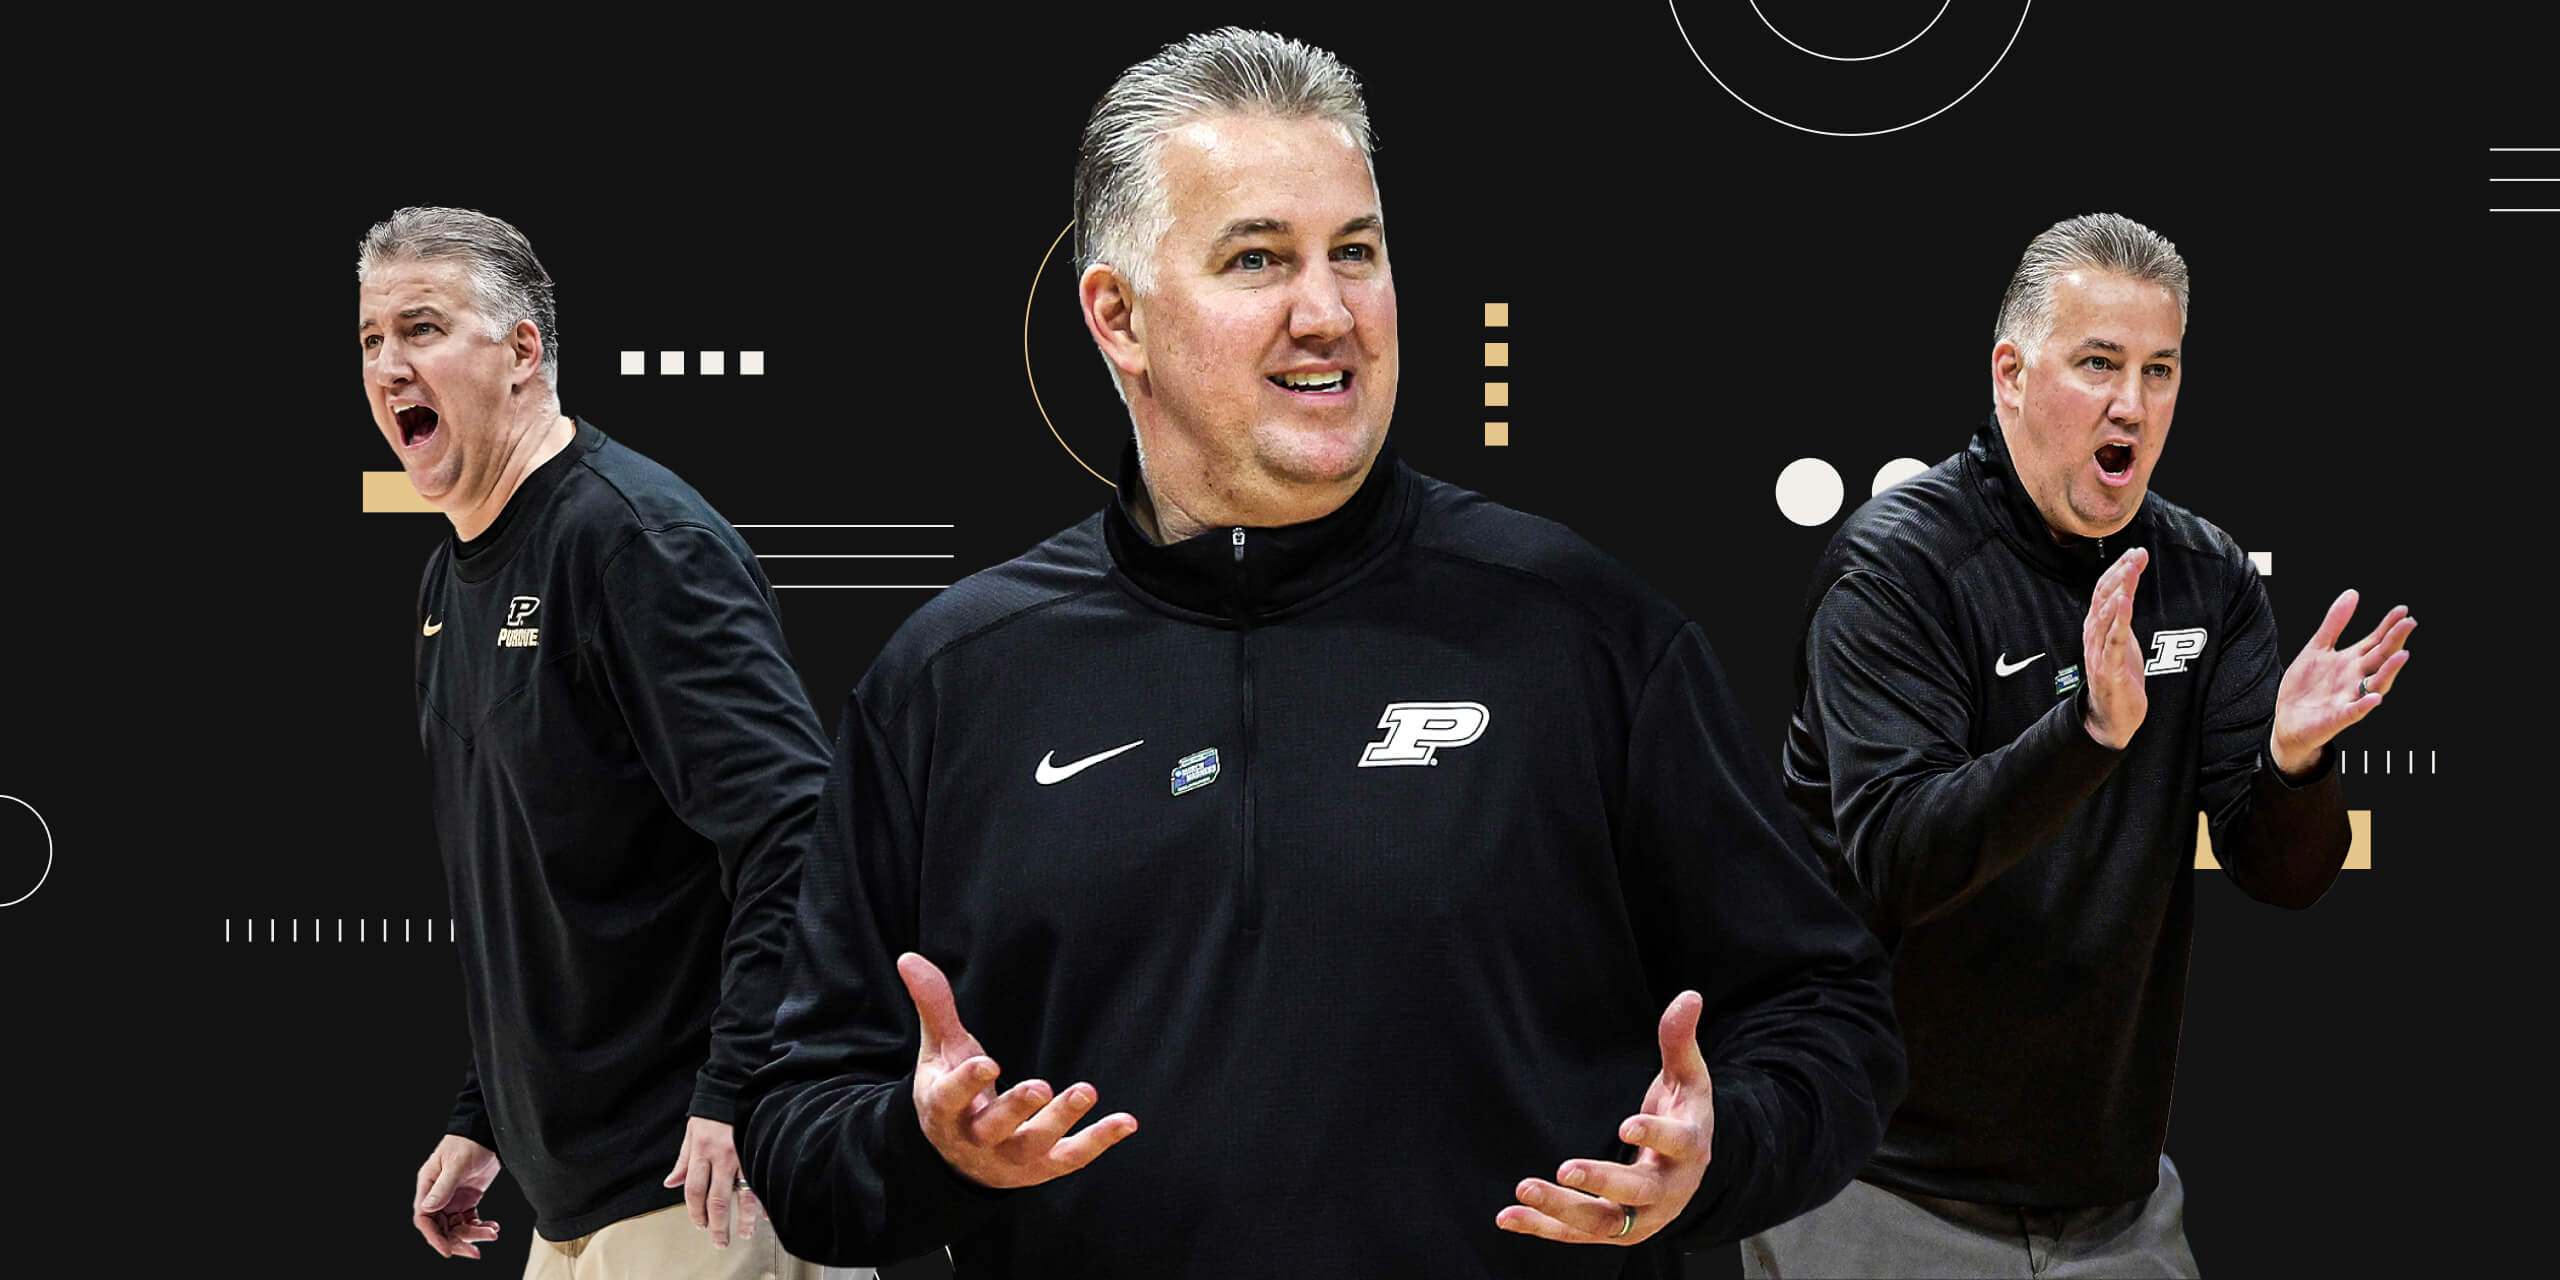 Is the beautiful mind of Purdue’s Matt Painter what college basketball